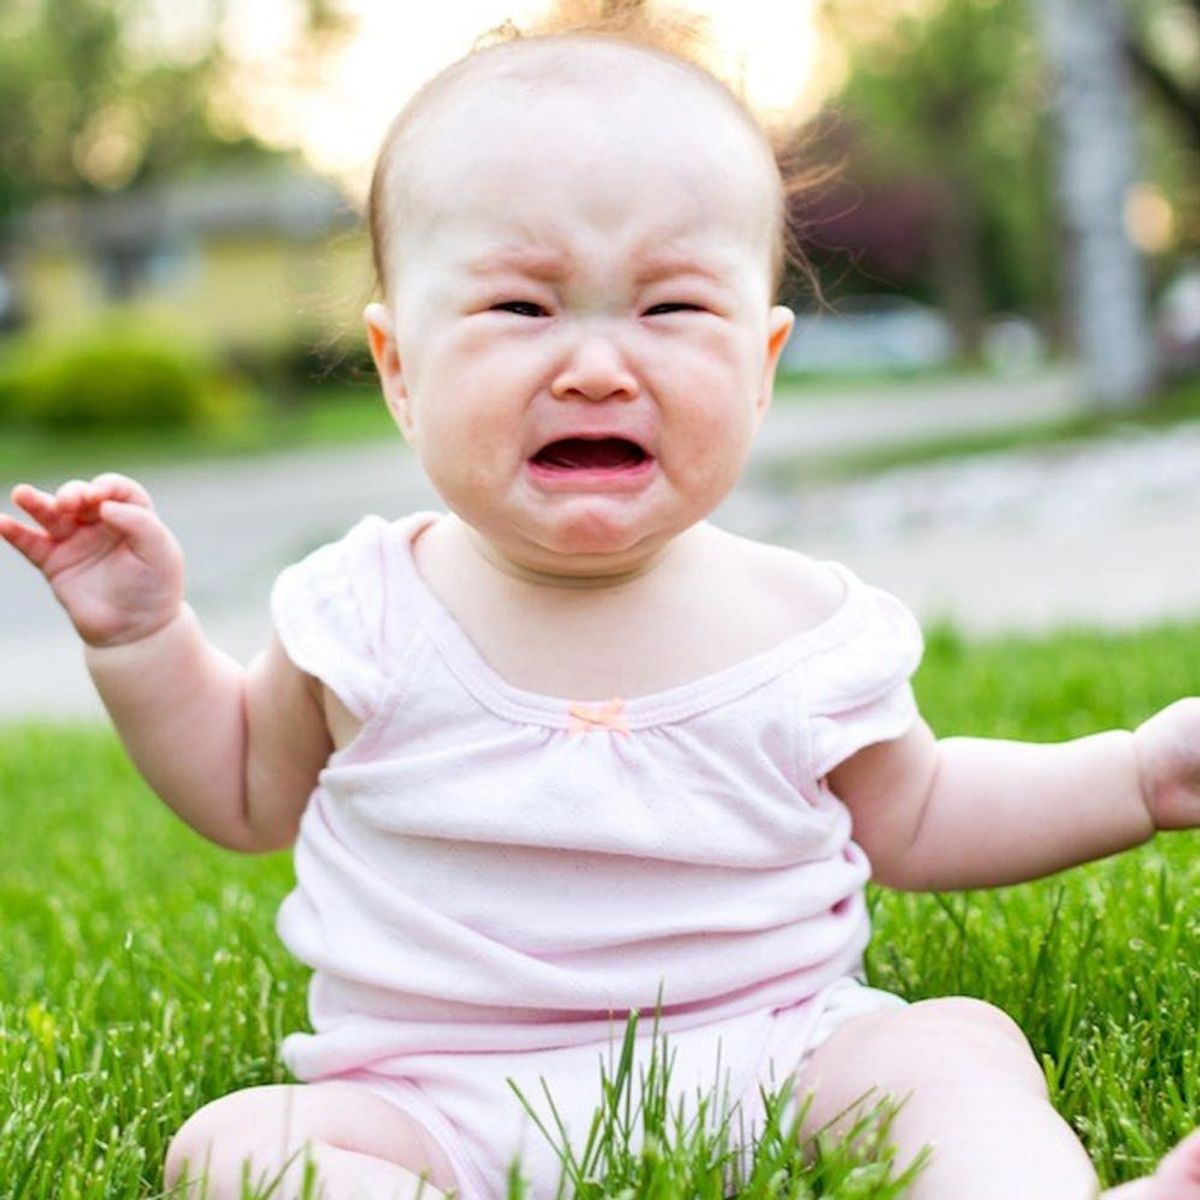 This Trick to Calm a Crying Baby Will Change a New Parent’s Life